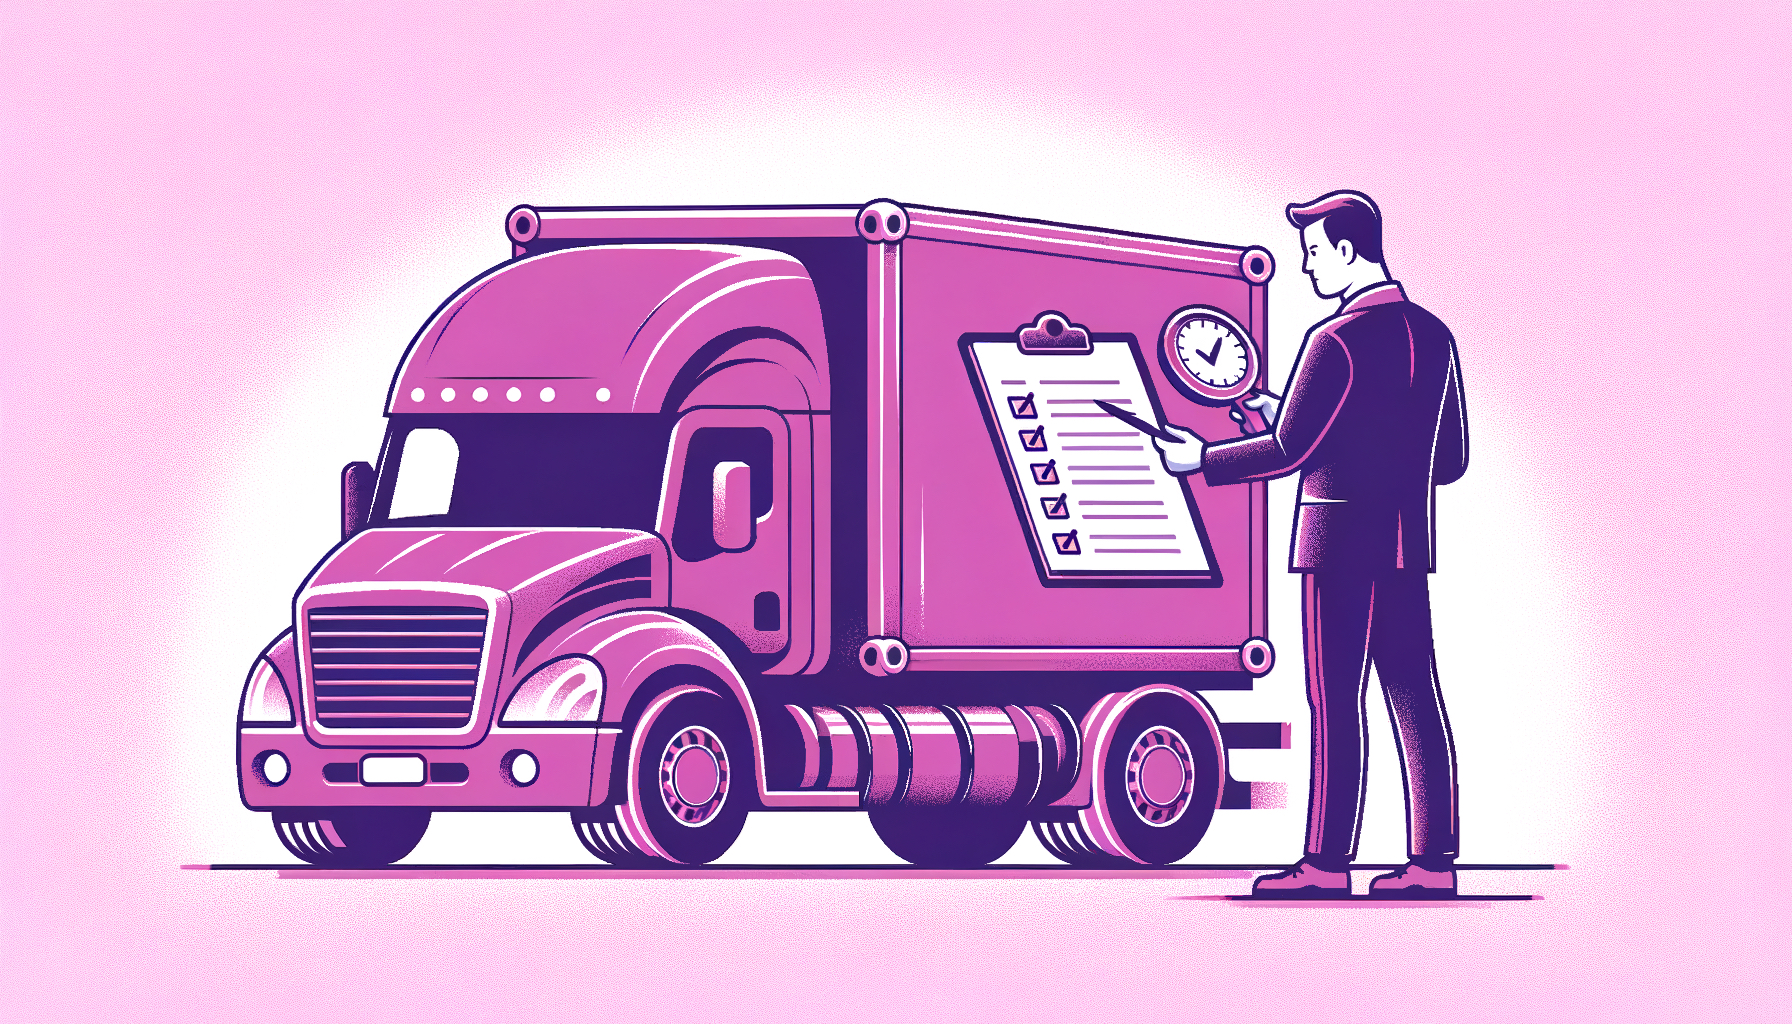 Cartoon-like fuschia colored moving truck being checked for quality and safety